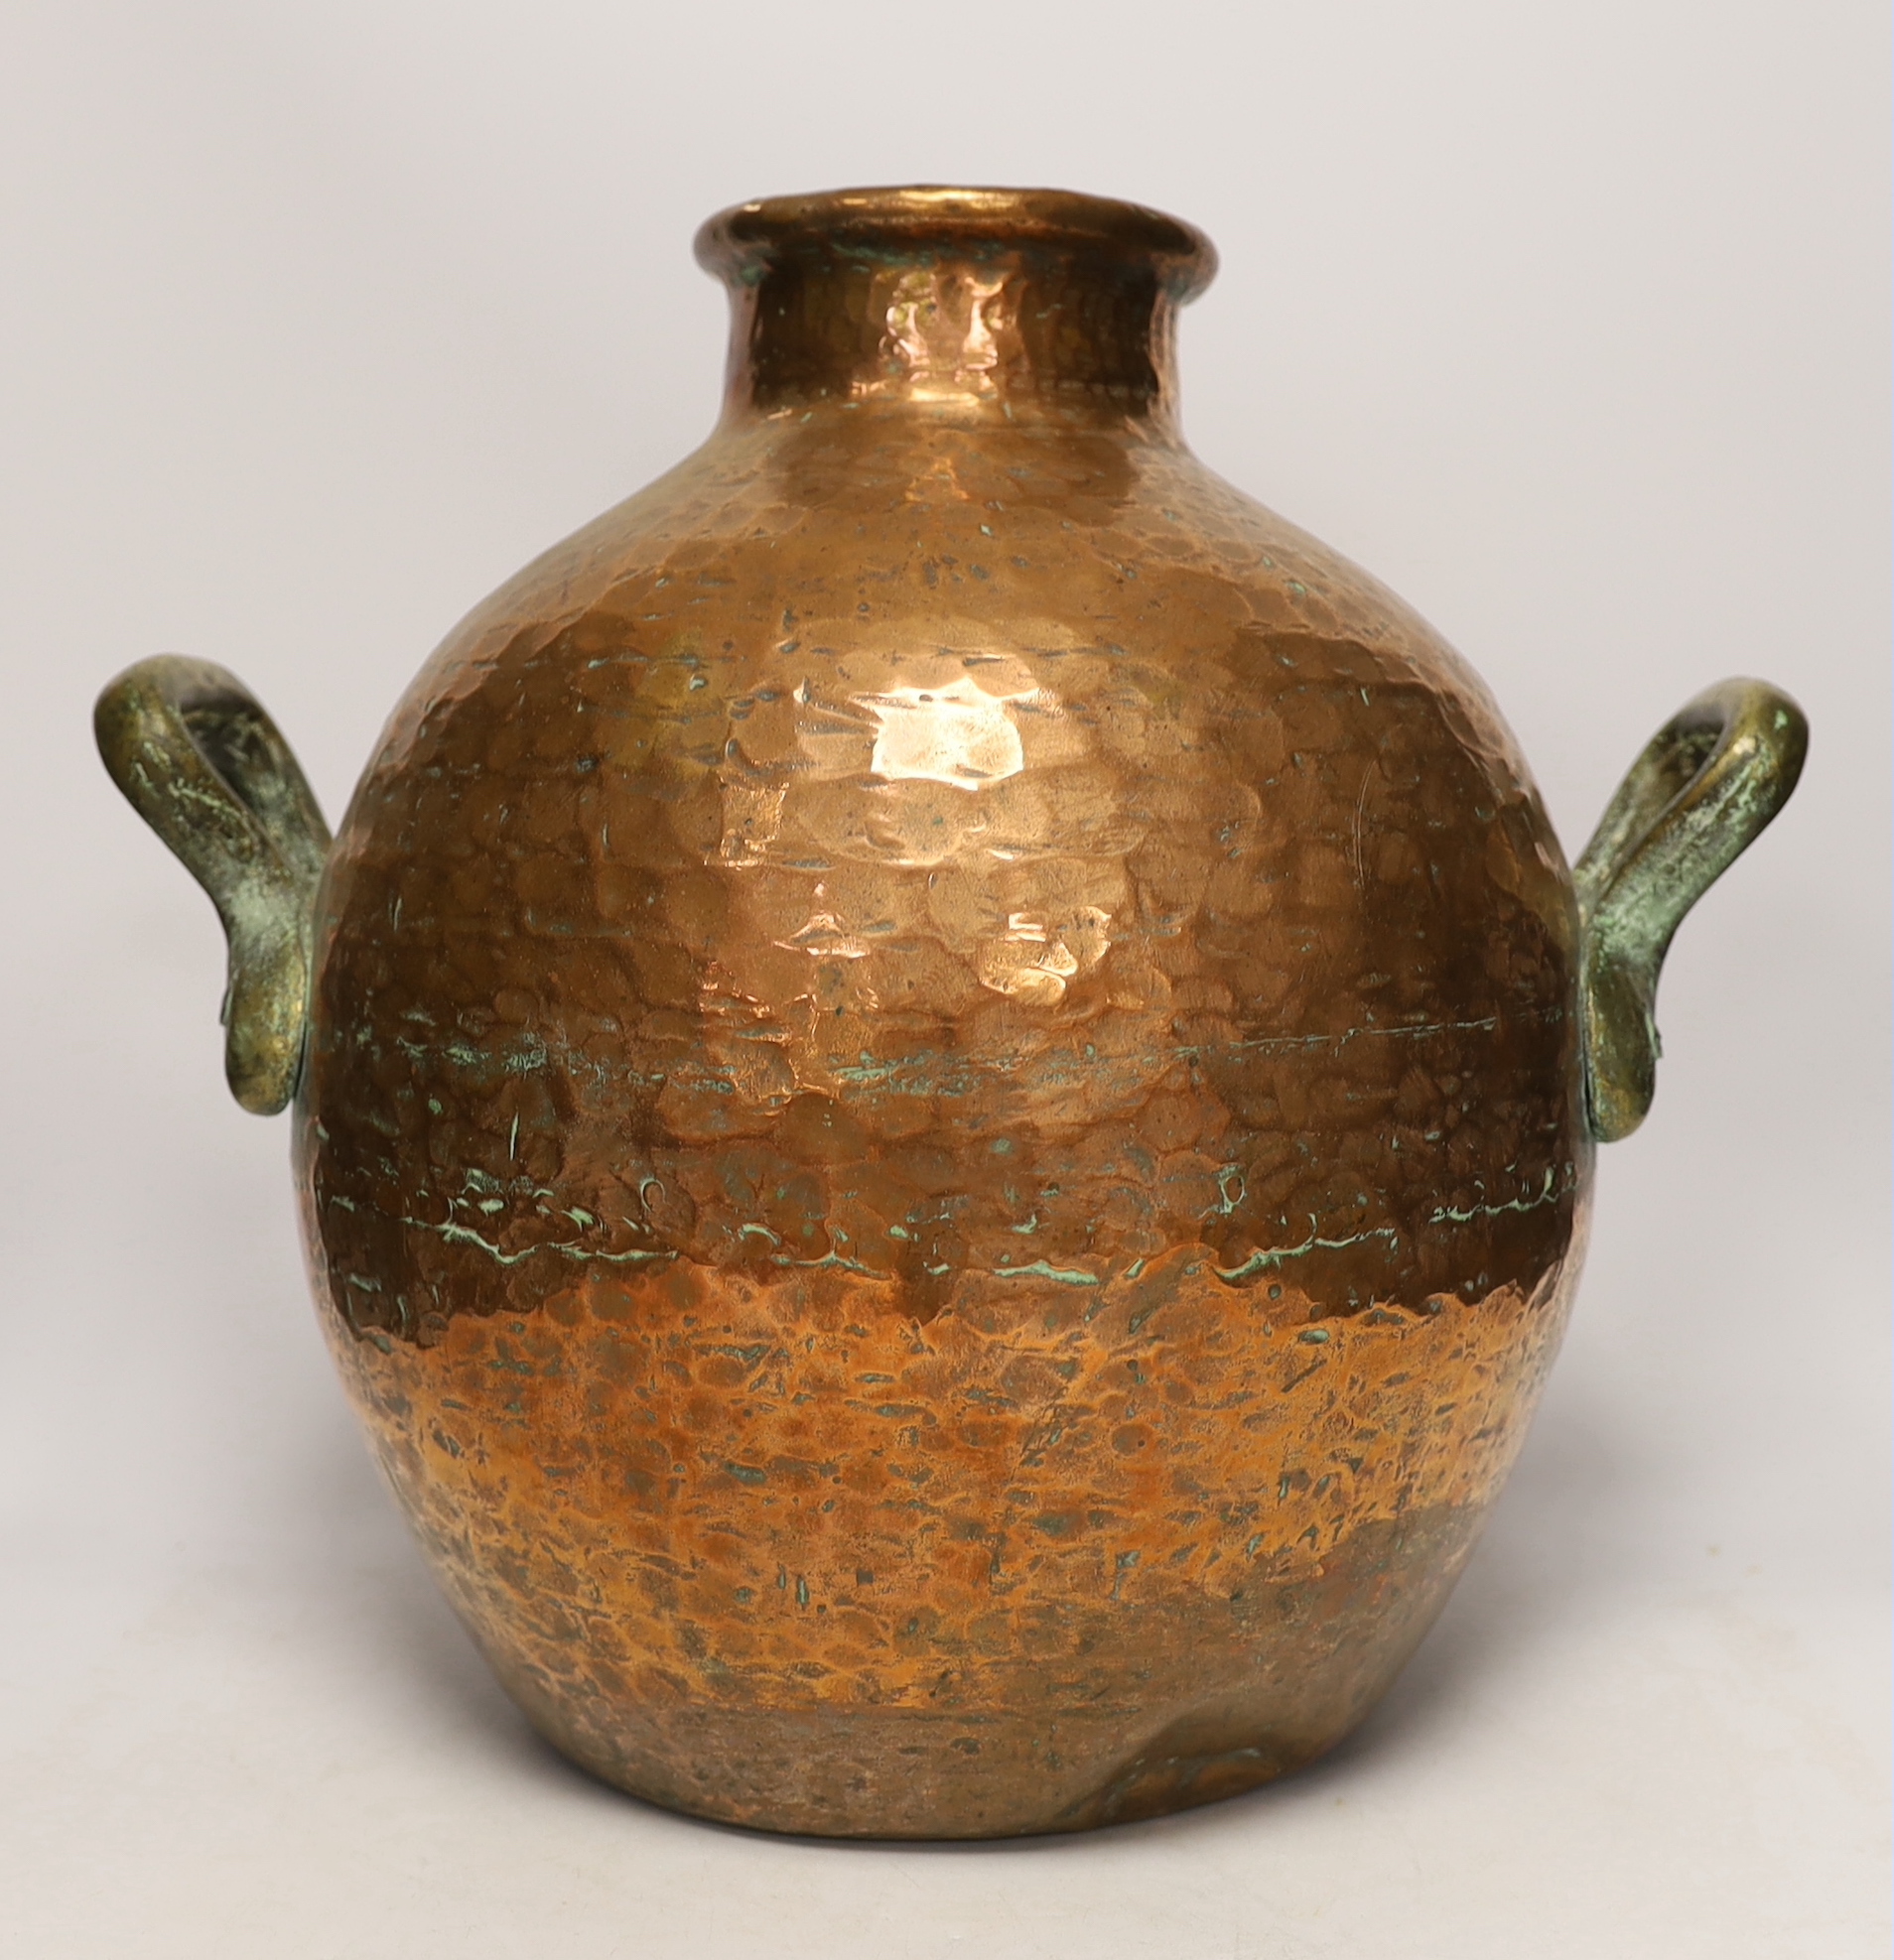 A copper vessel with double brass handles, 39cm high